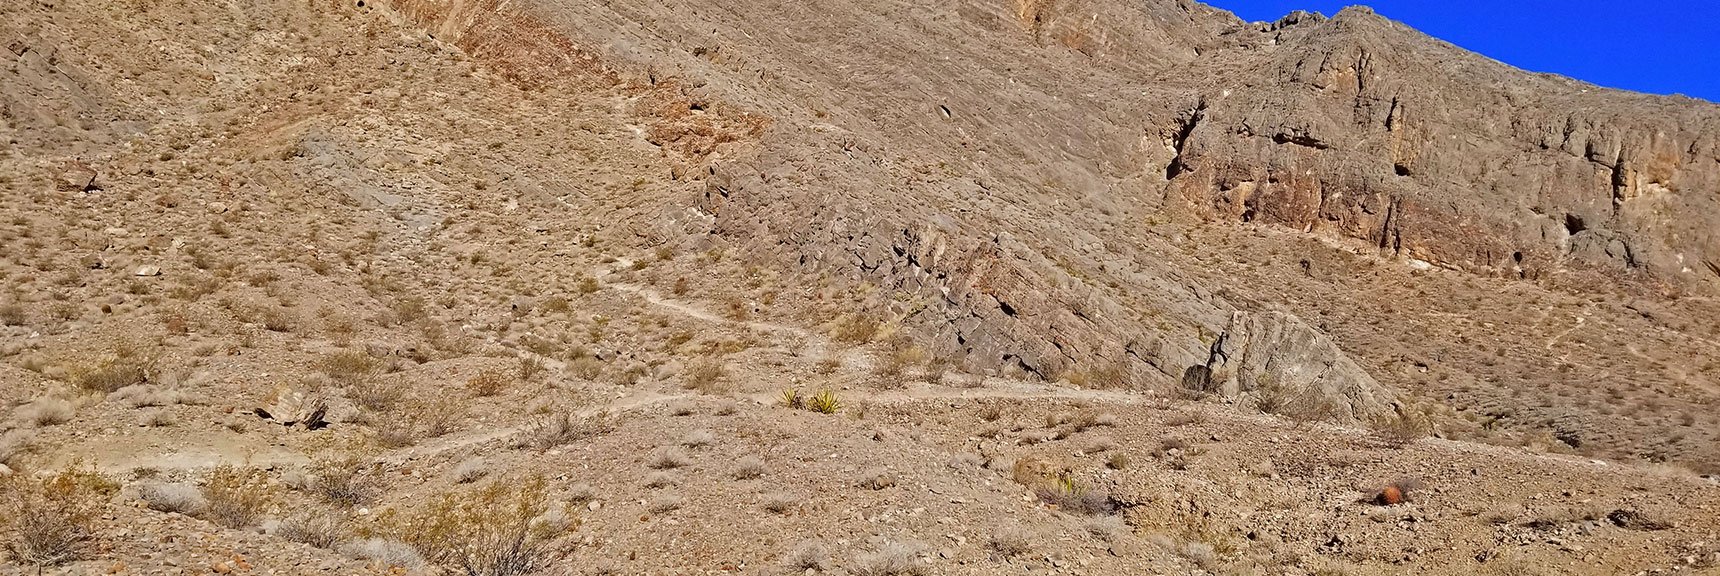 Circling Around to the South, Additional View, Potential Climbing Routes | Lone Mountain | Las Vegas, Nevada